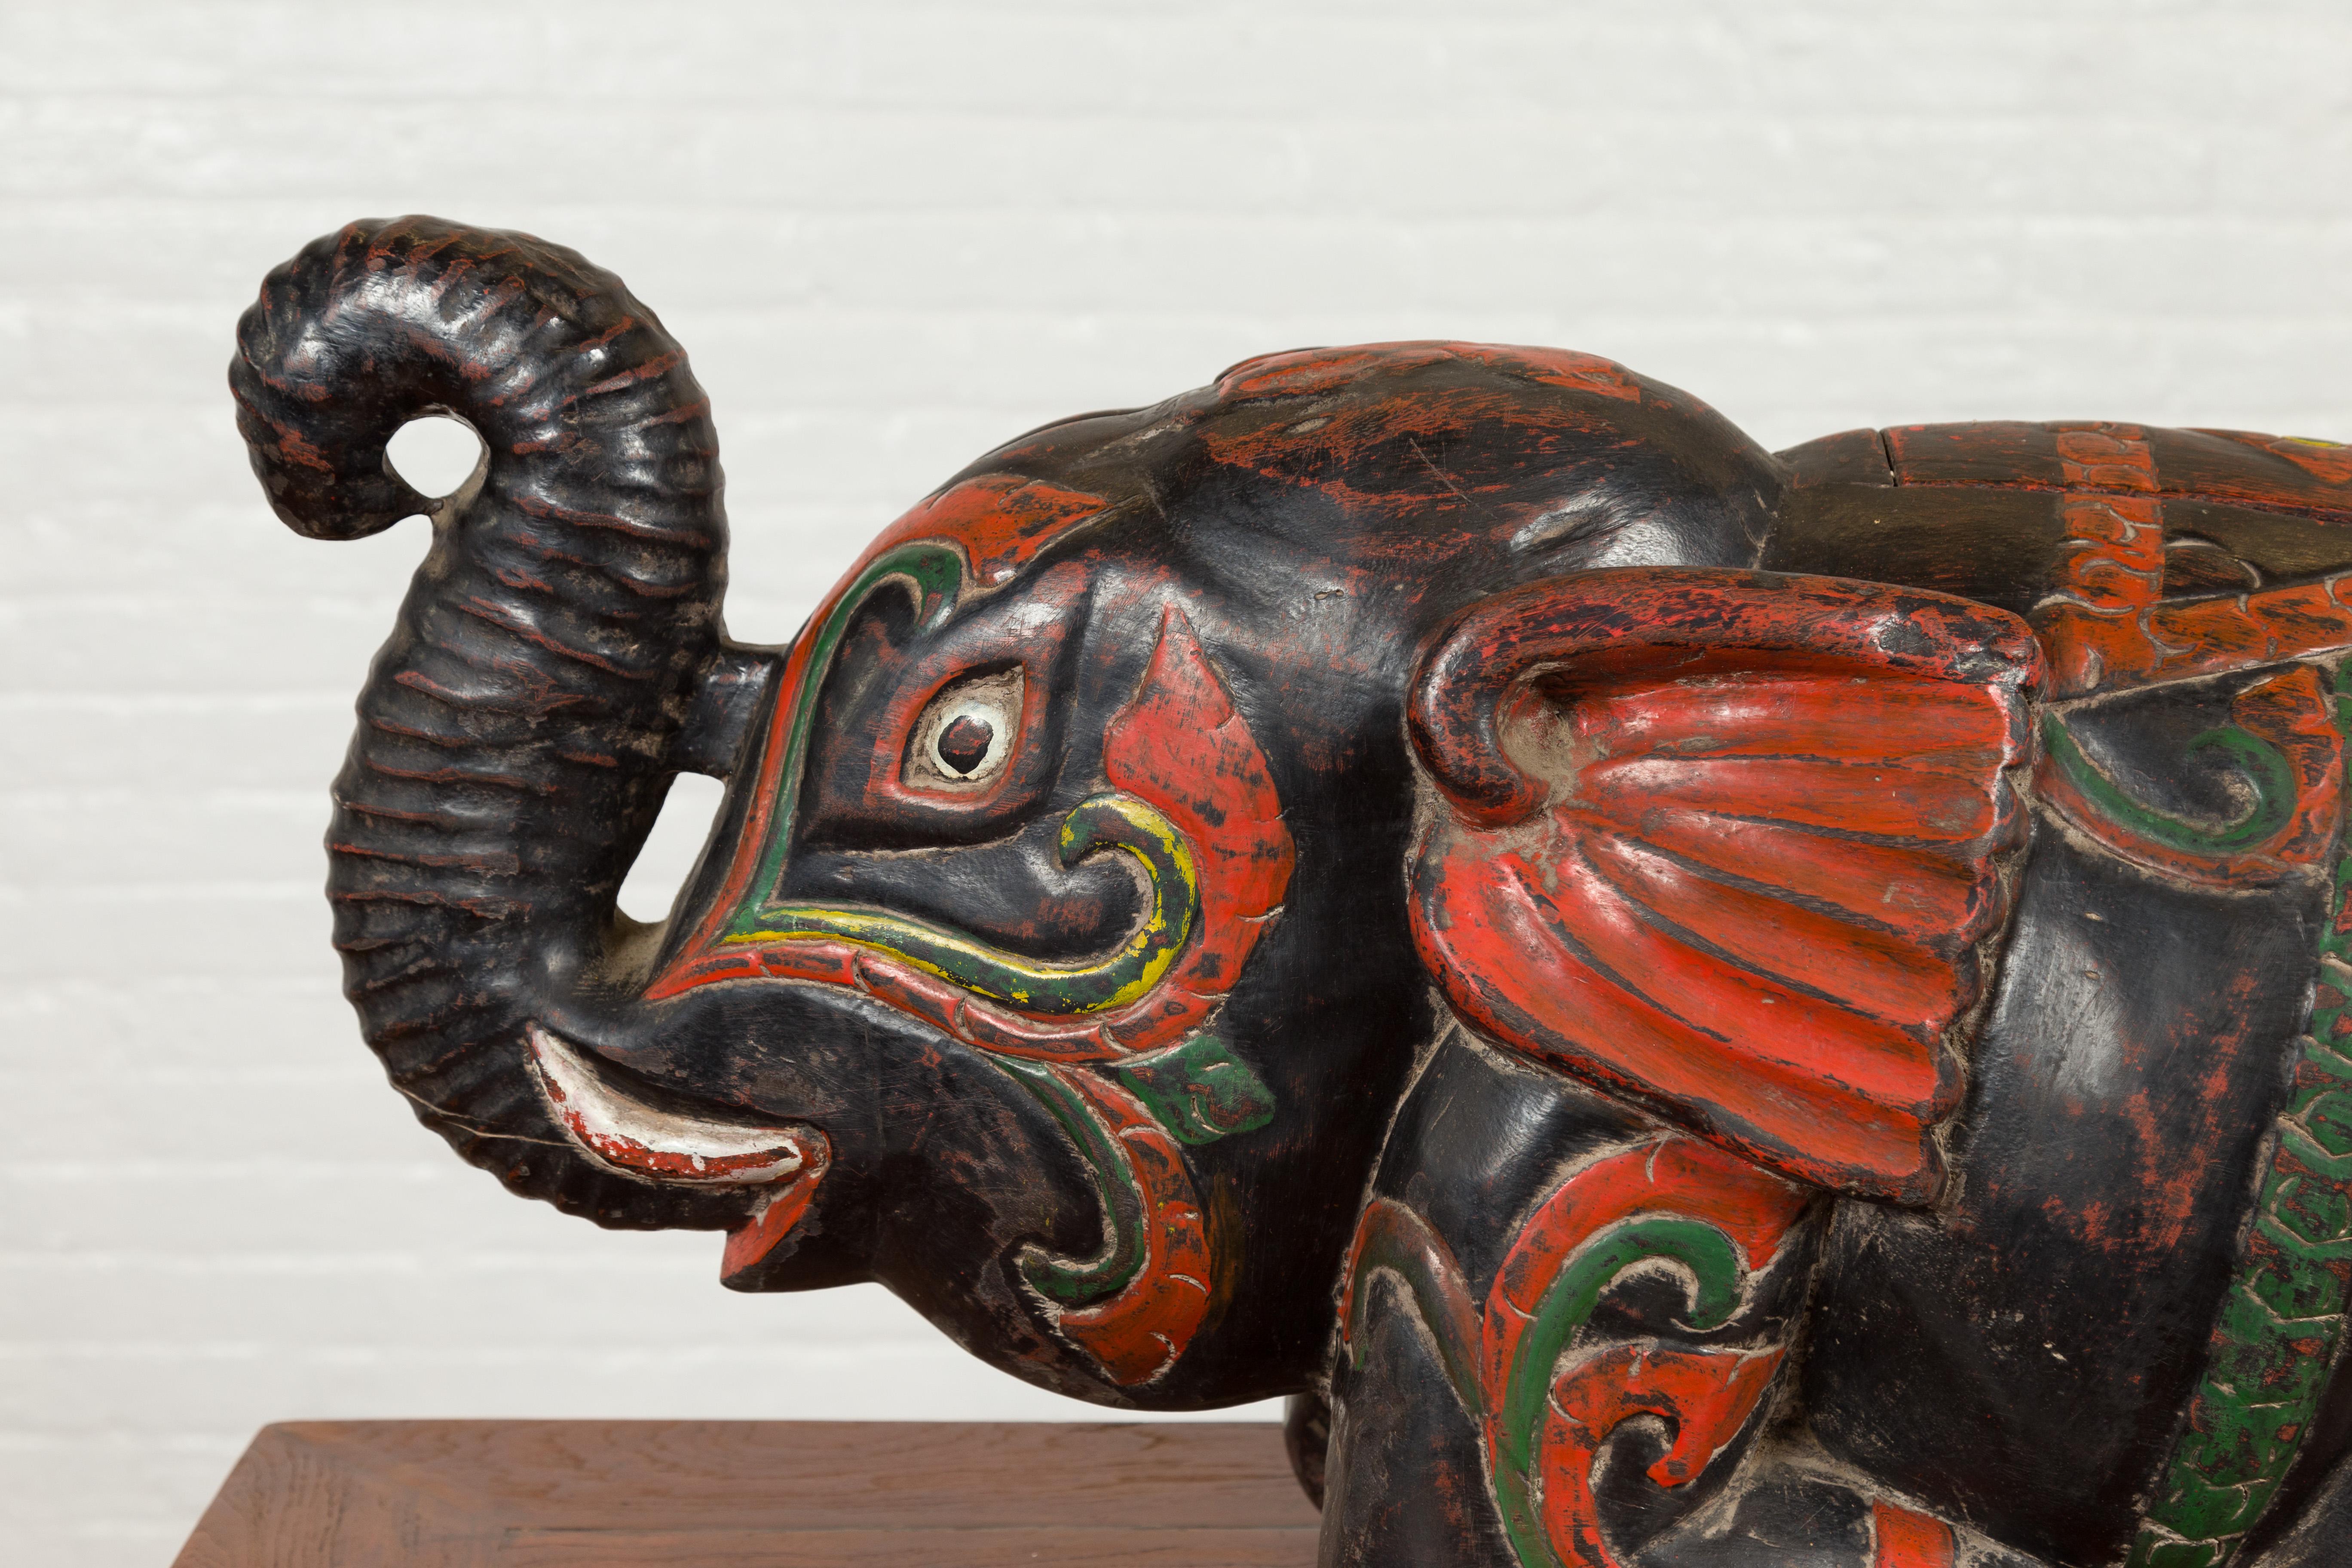 Thai Handmade Asian Elephant Sculpture with Incised Decor and Multi-Color Finish